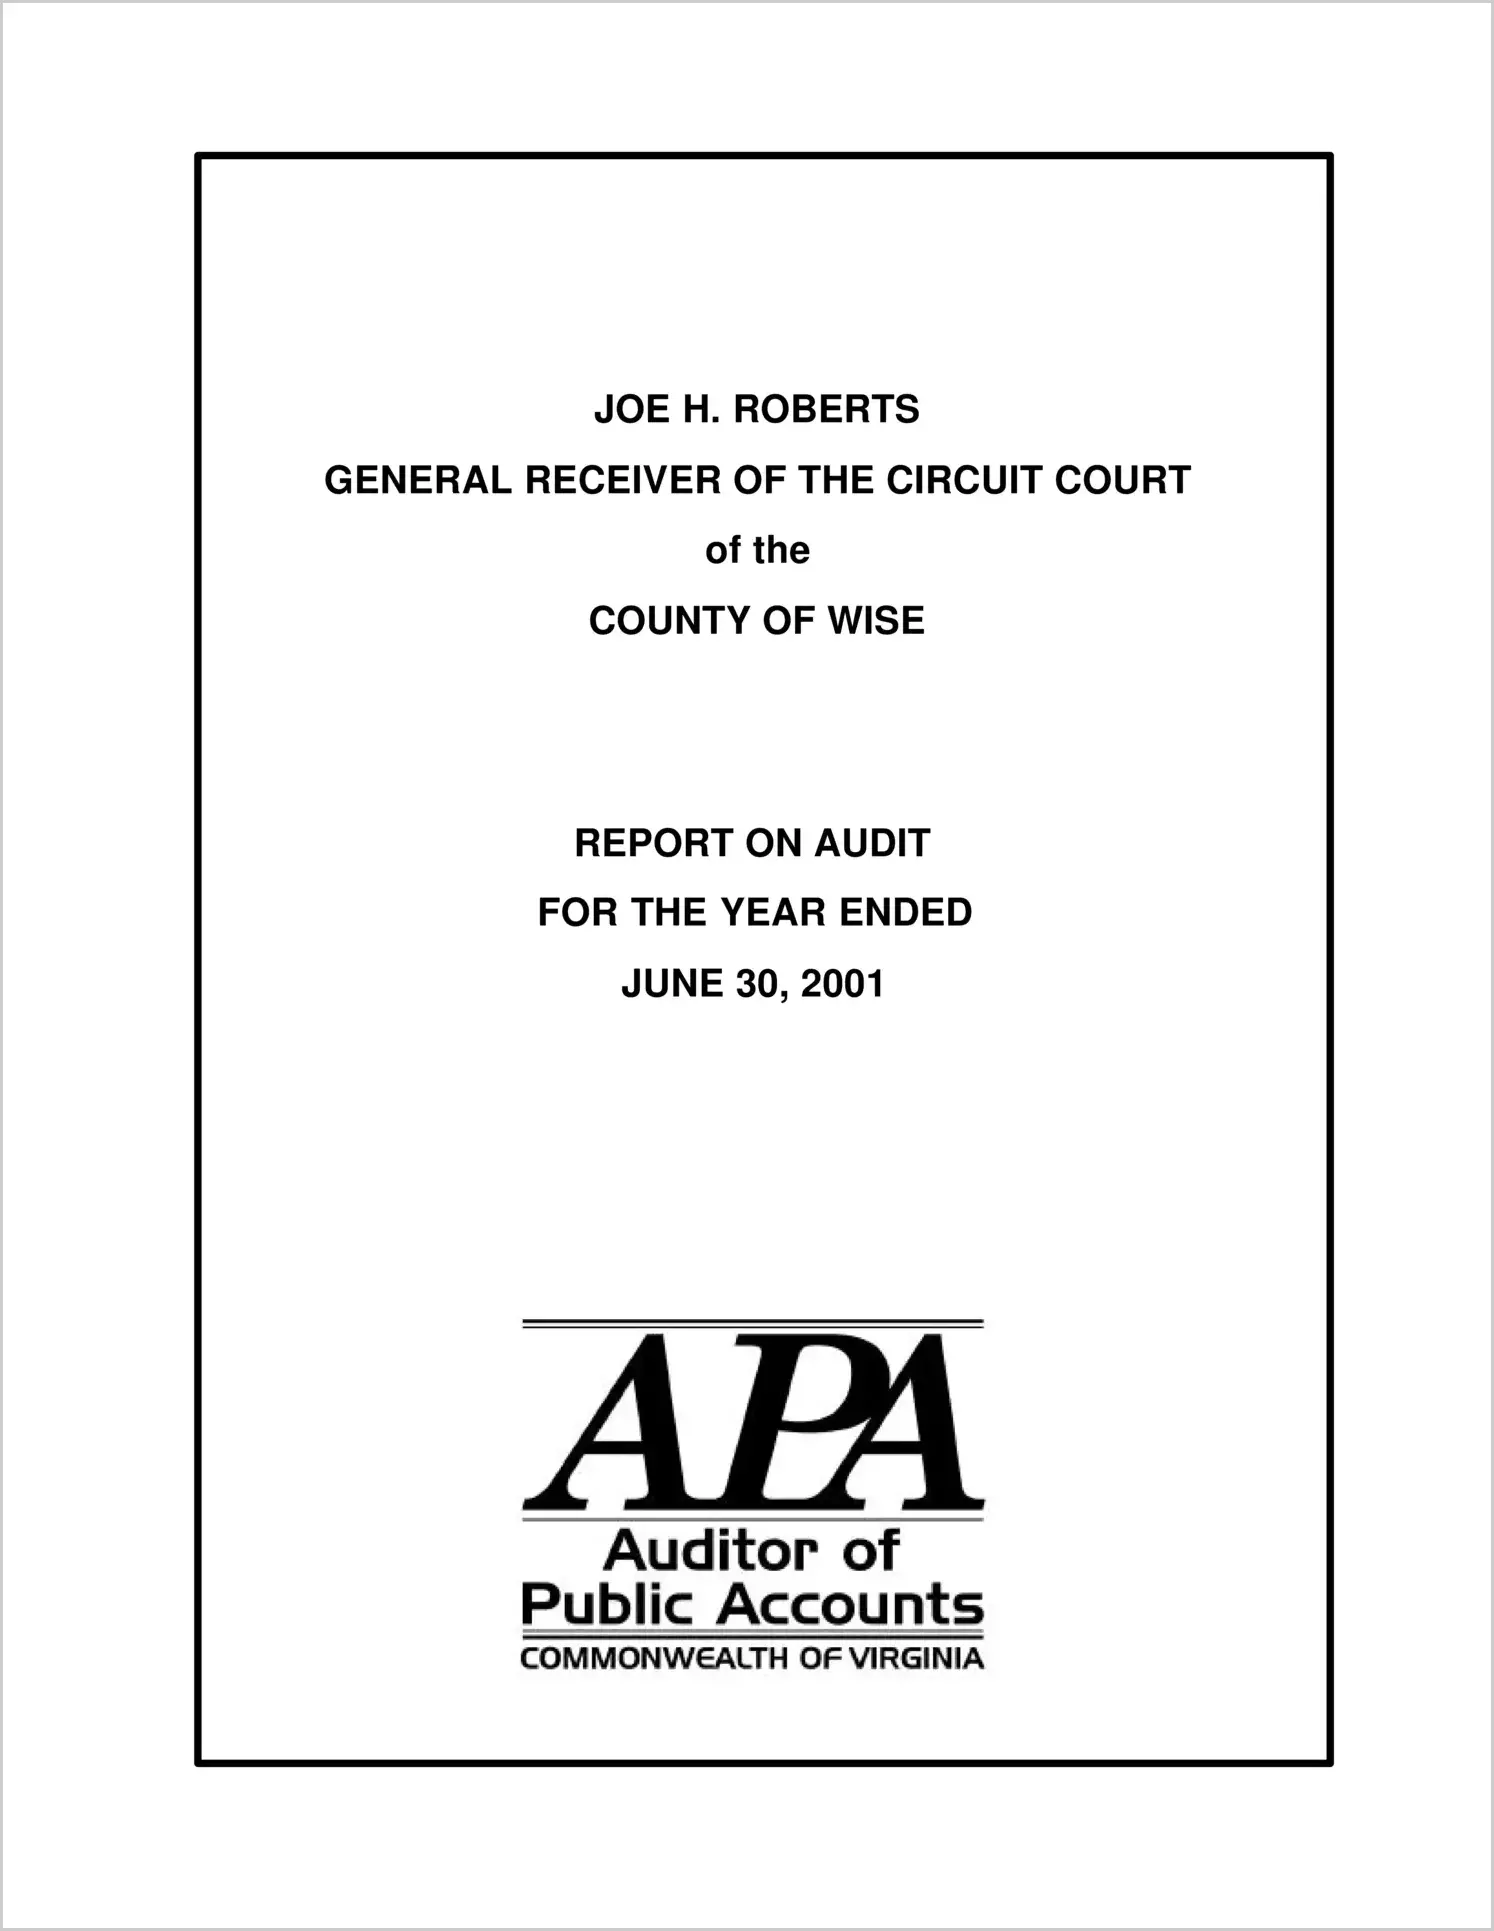 General Receiver of the Circuit Court of the County of Wise for the year ended June 30, 2001